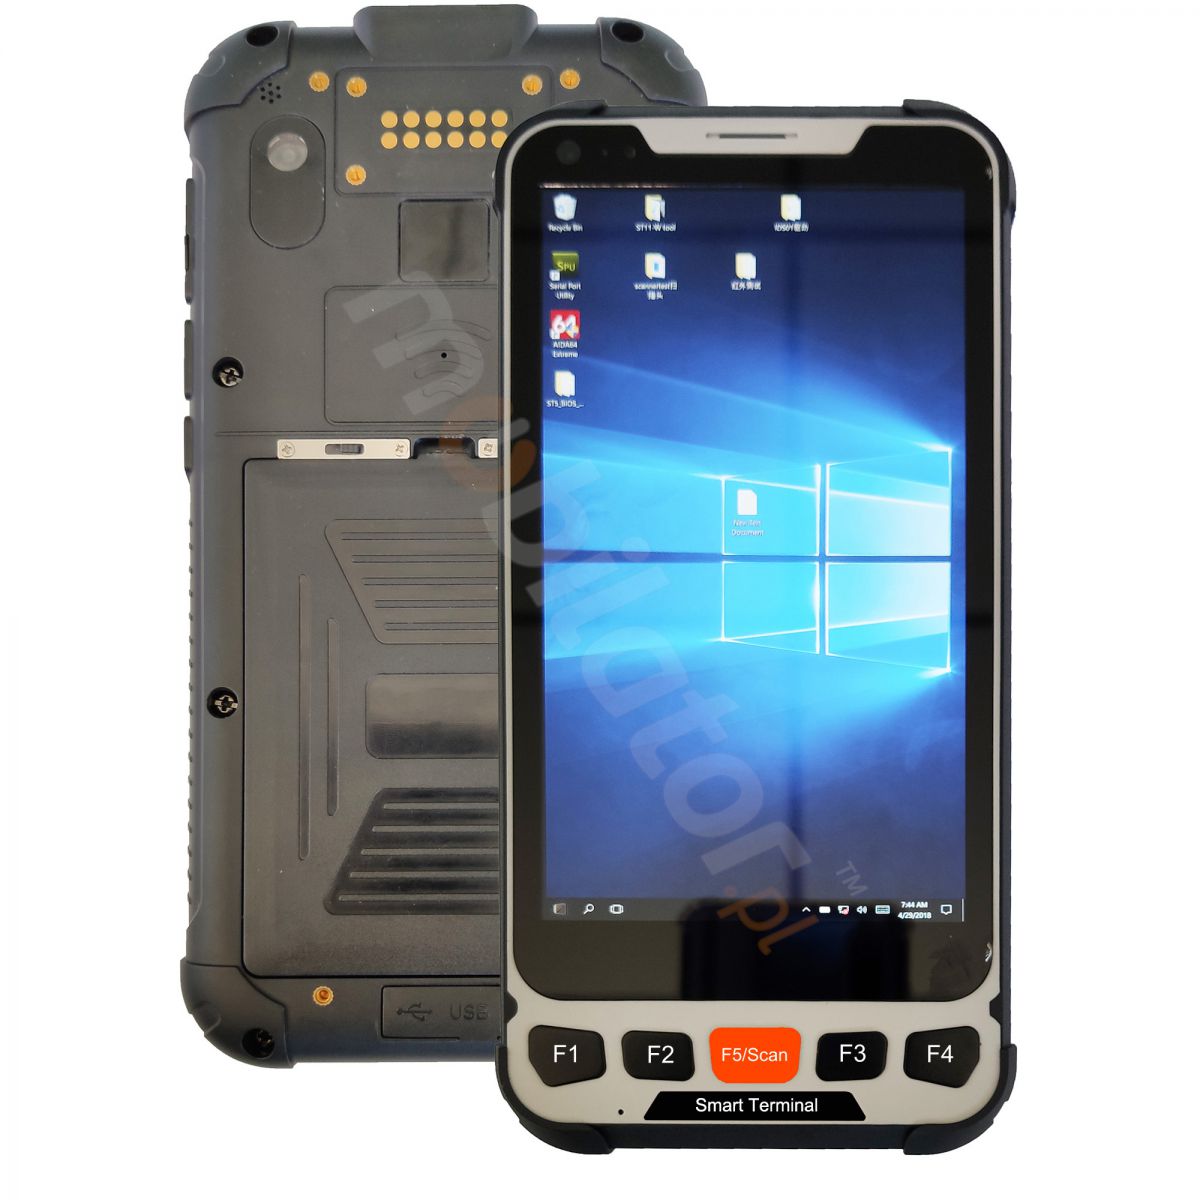 Mobipad SH5 v.3 - Industrial data terminal with UHF RFID, NFC, 4G and BT 4.0, 4GB RAM and 64GB disk 